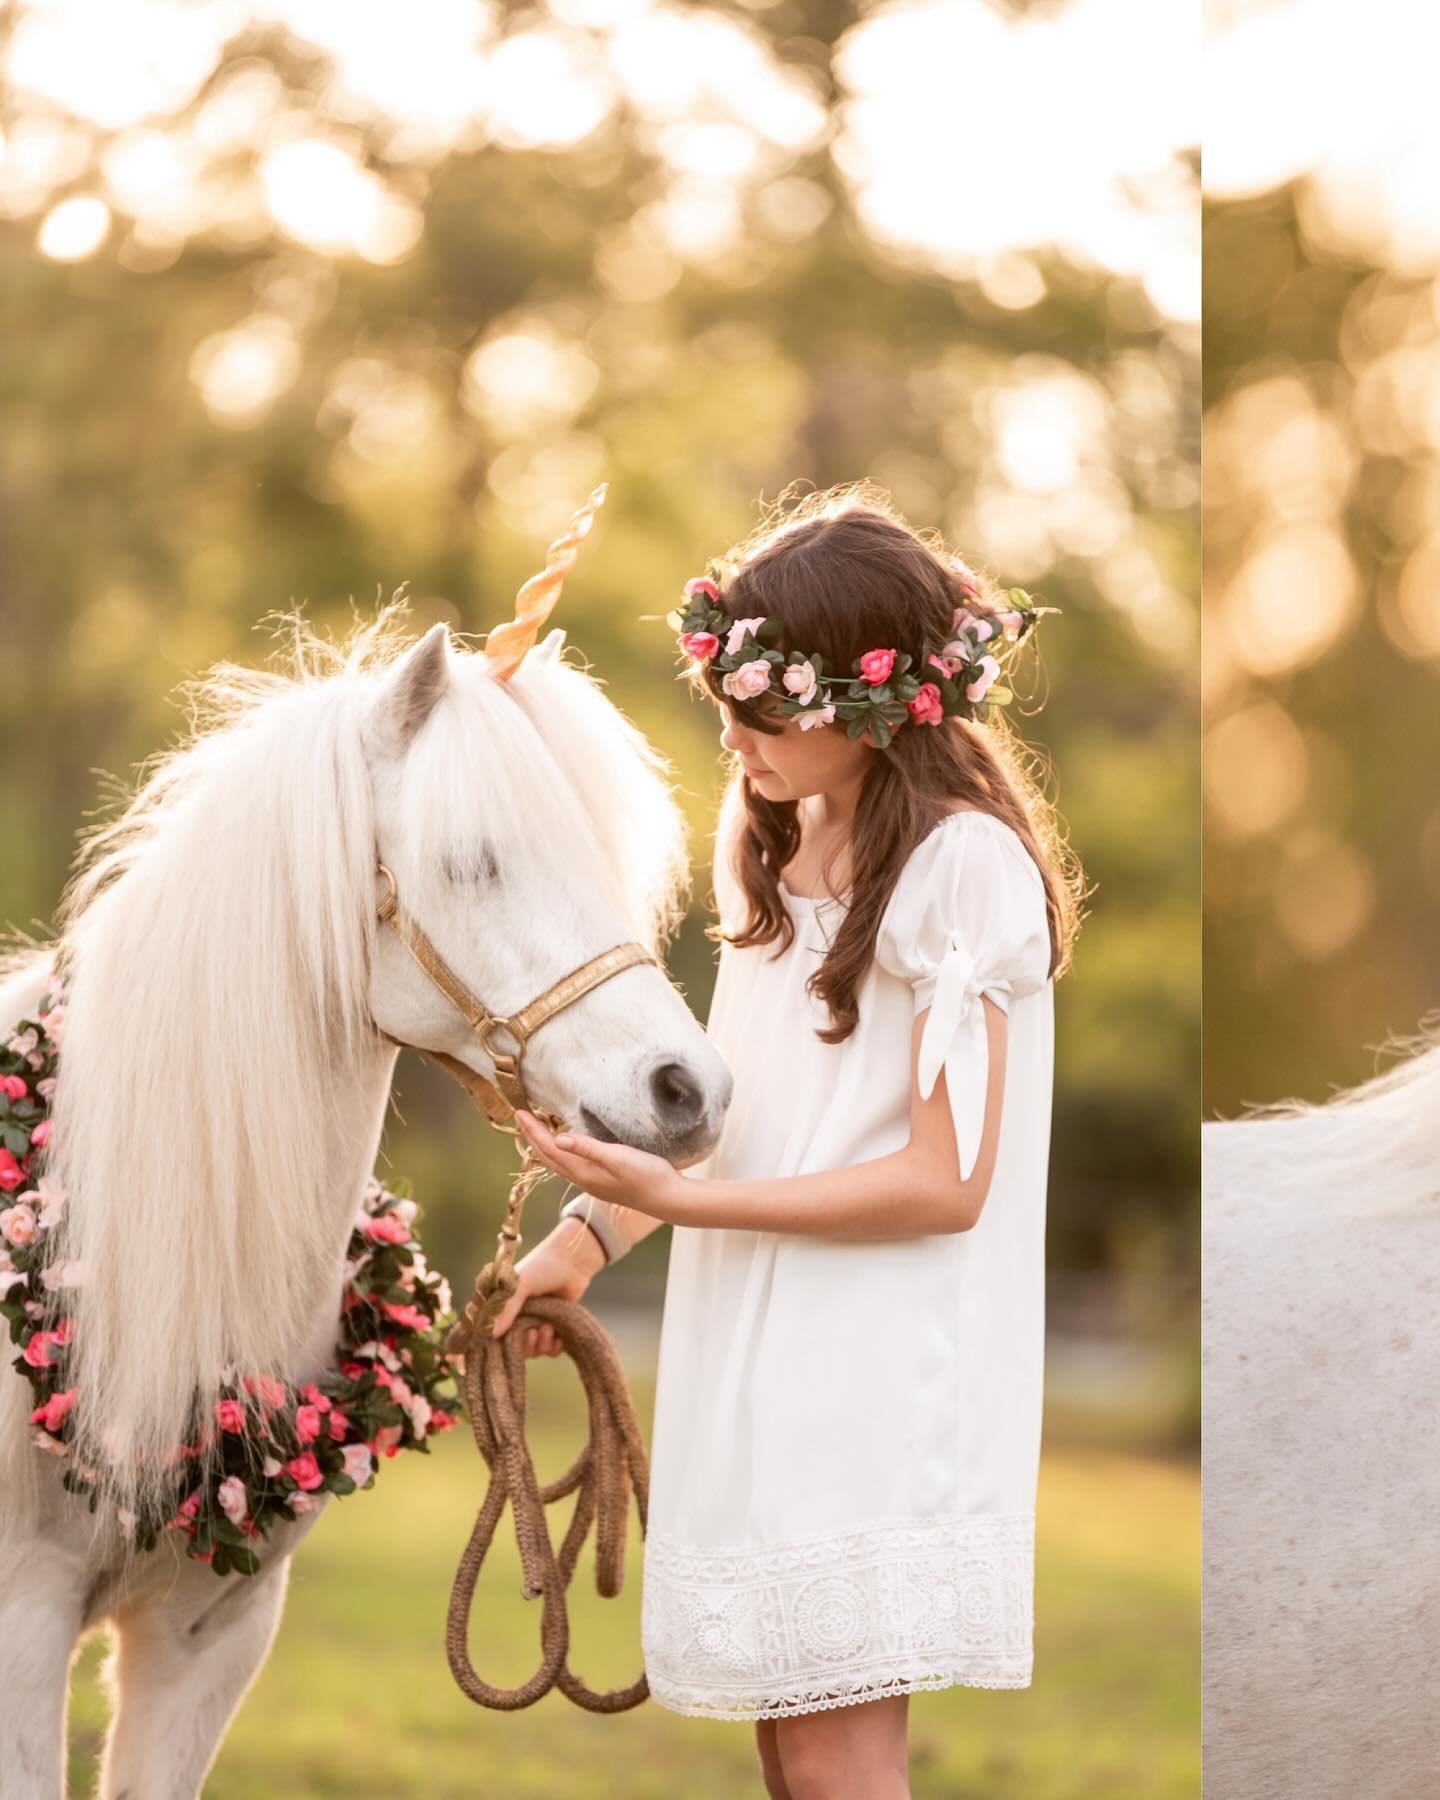 I am so excited to offer Unicorn Mini Sessions with @squinlanequine May 18th! There are only 8 available spots for these. Kiddos will take photos with the most perfect unicorn of all time, Sugar, at her private farm in Rocky Point. Sessions are 15 mi